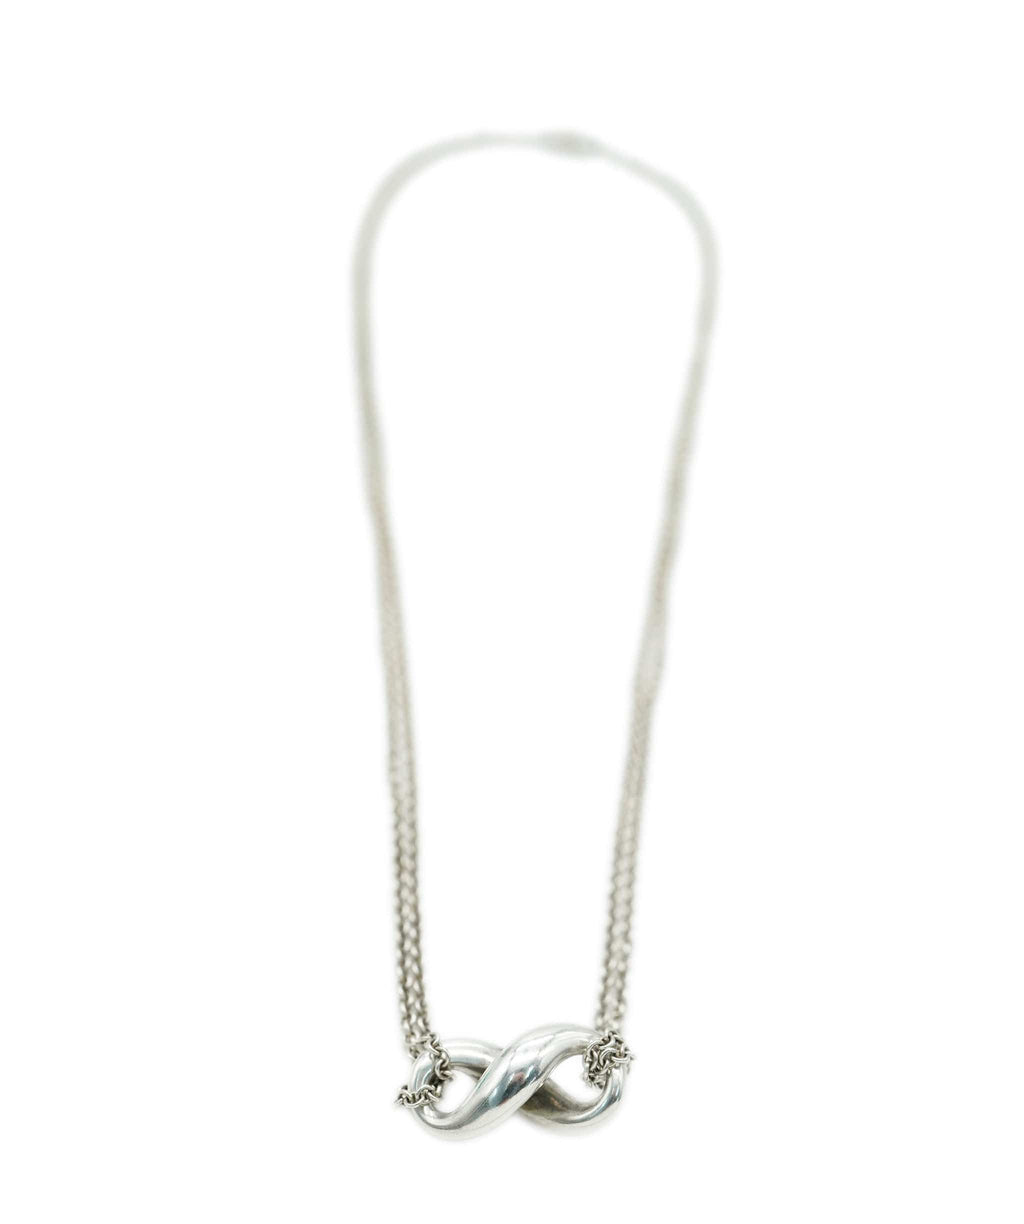 Tiffany & Co. & Co Infinity Other Silver Necklaces | Silver necklaces, Infinity  necklace silver, Silver